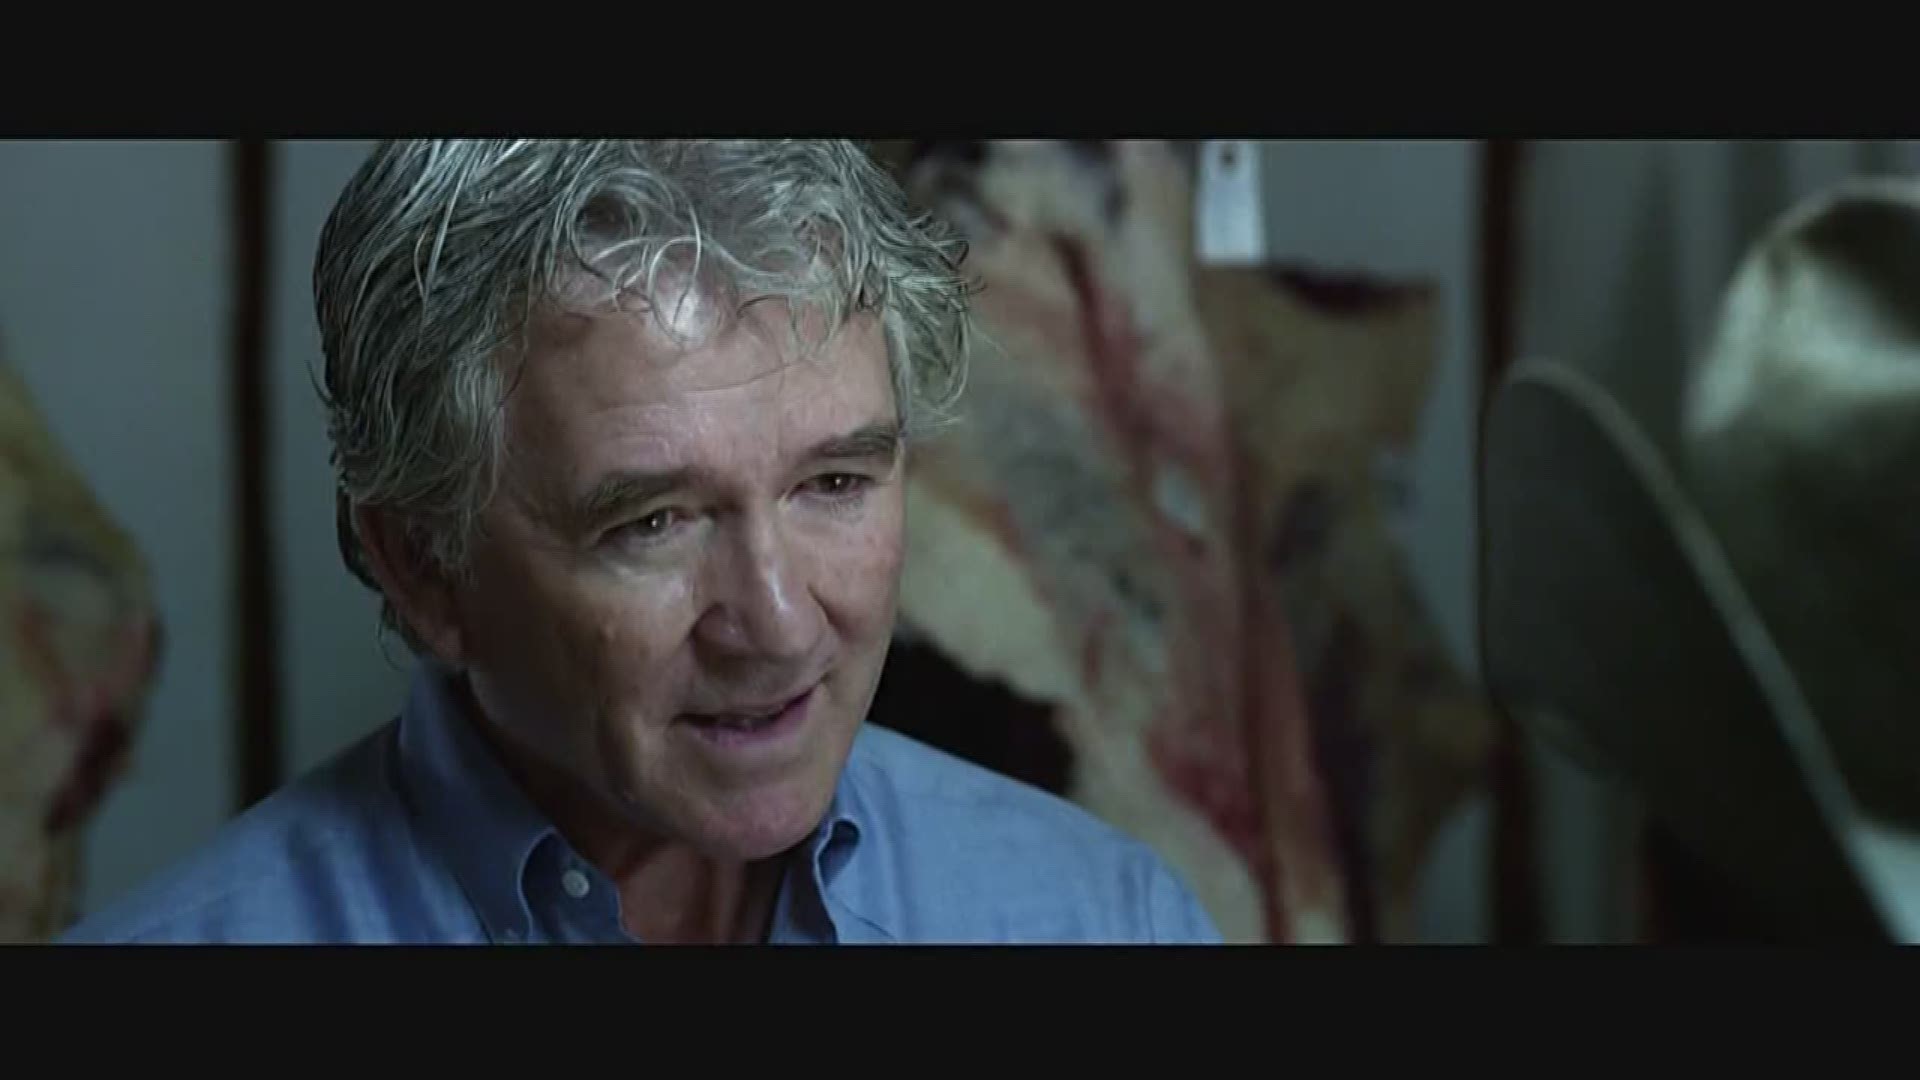 Patrick Duffy speaks about new film 'Trafficked', playing at Cinemark West Plano through Oct. 19. Clip Courtesy: Epic Pictures